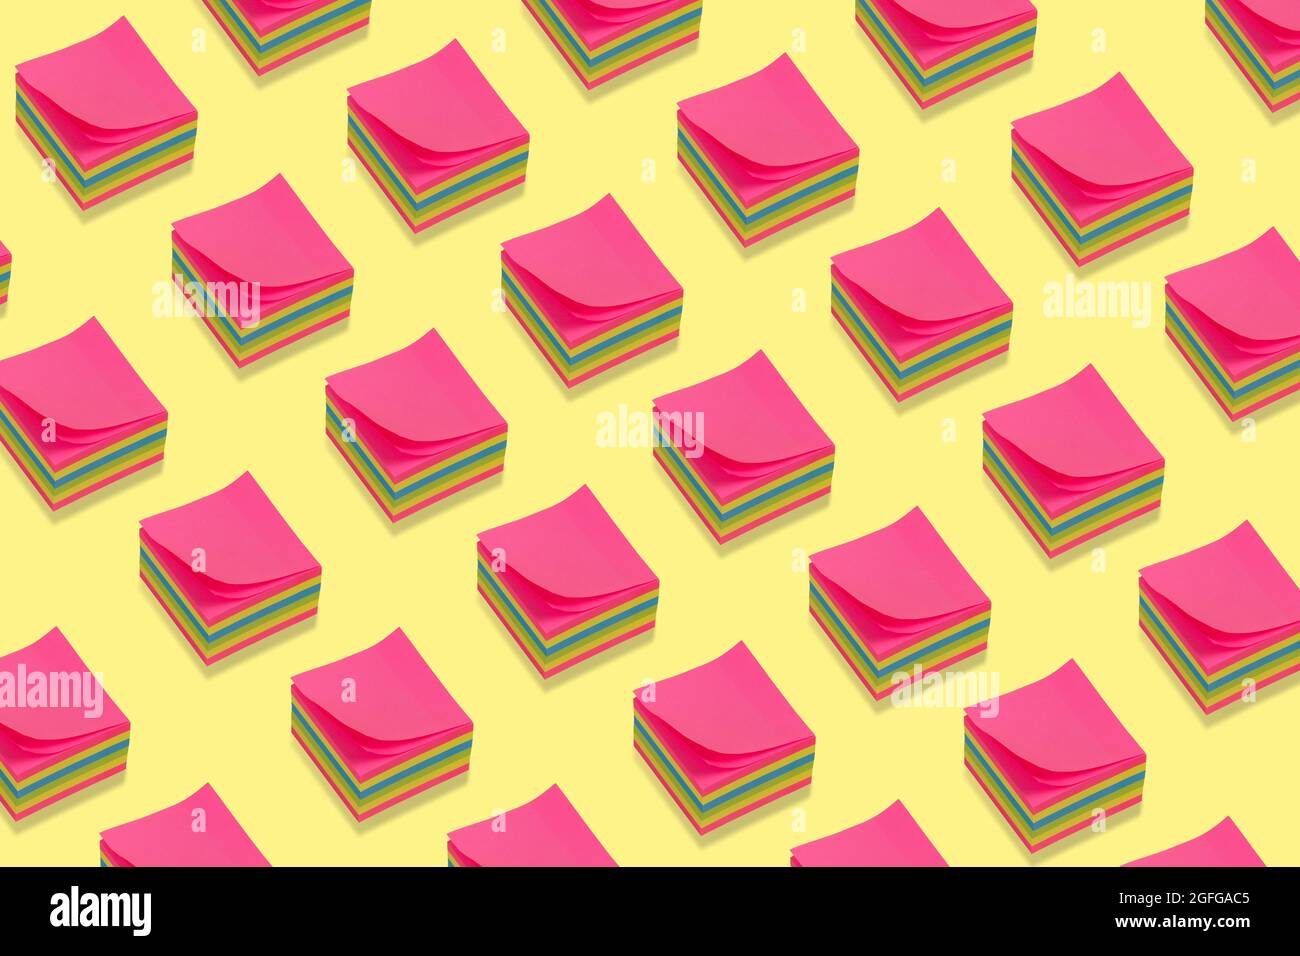 Colorful sticky notes pattern on a  yellow background. Creative minimal isometric concept. Back to school background. Stock Photo